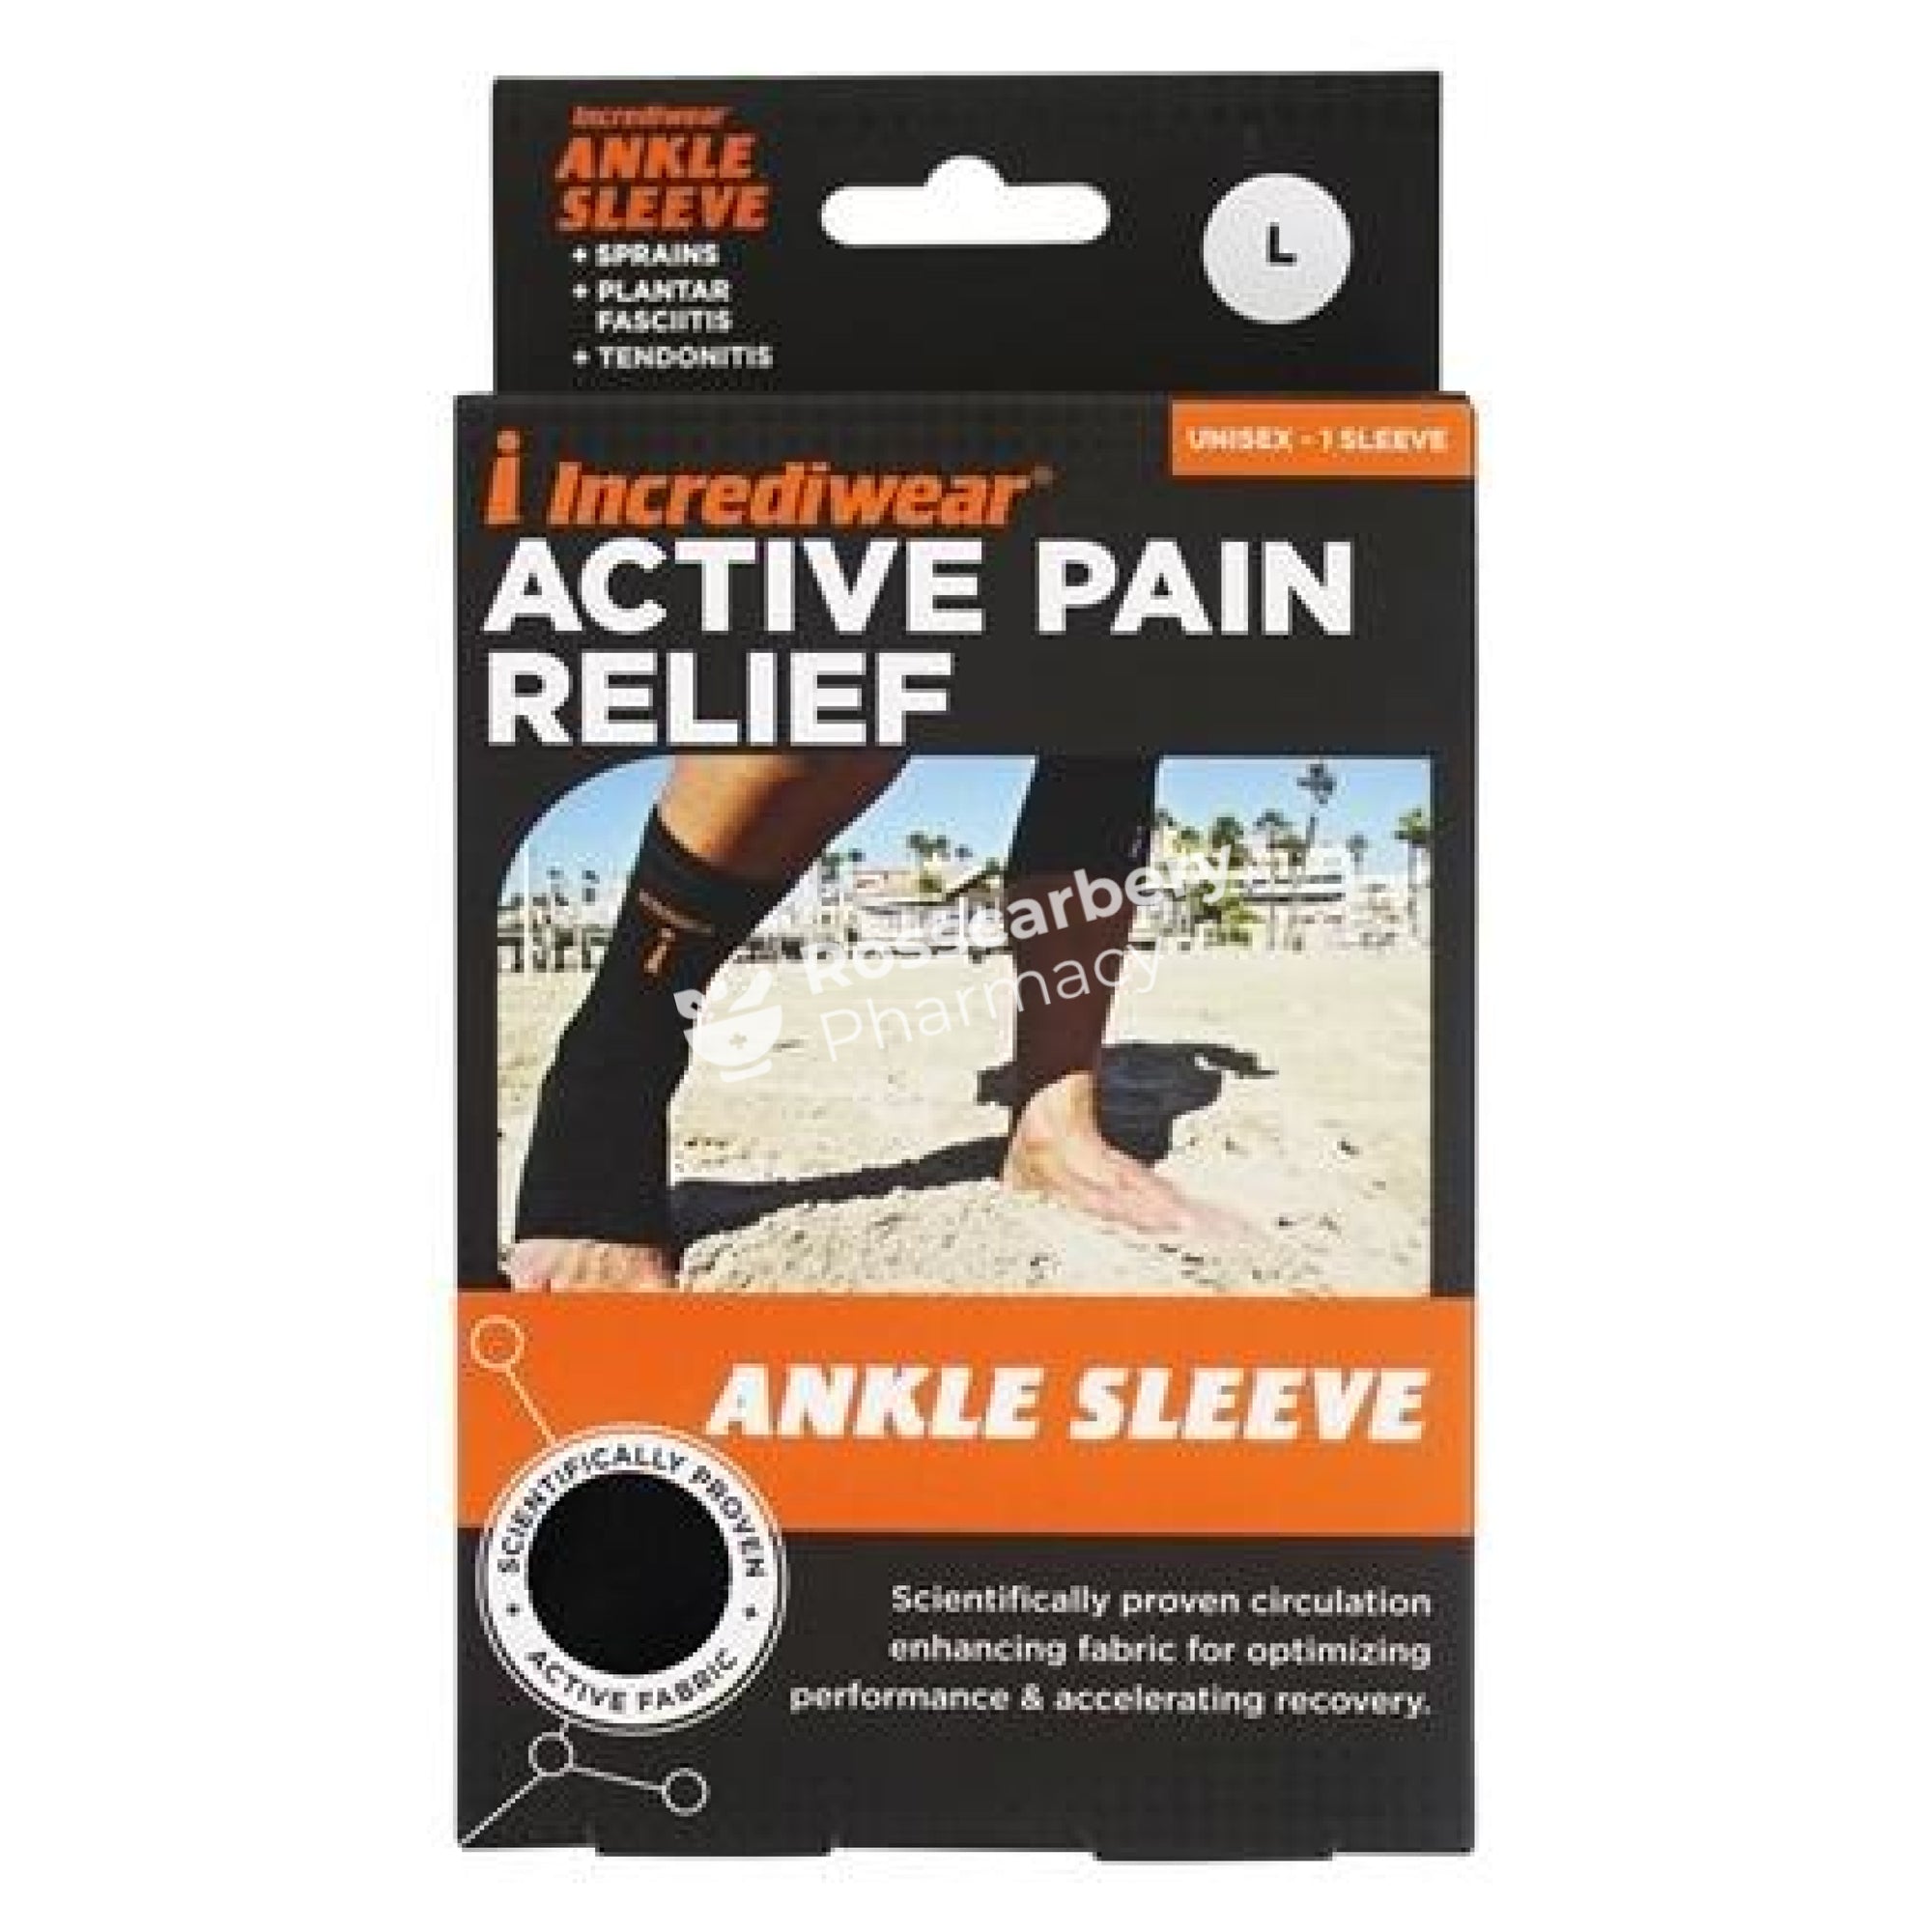 Incrediwear Active Pain Relief Ankle Sleeve - Black 1 / Large Supports & Compression Hoisery